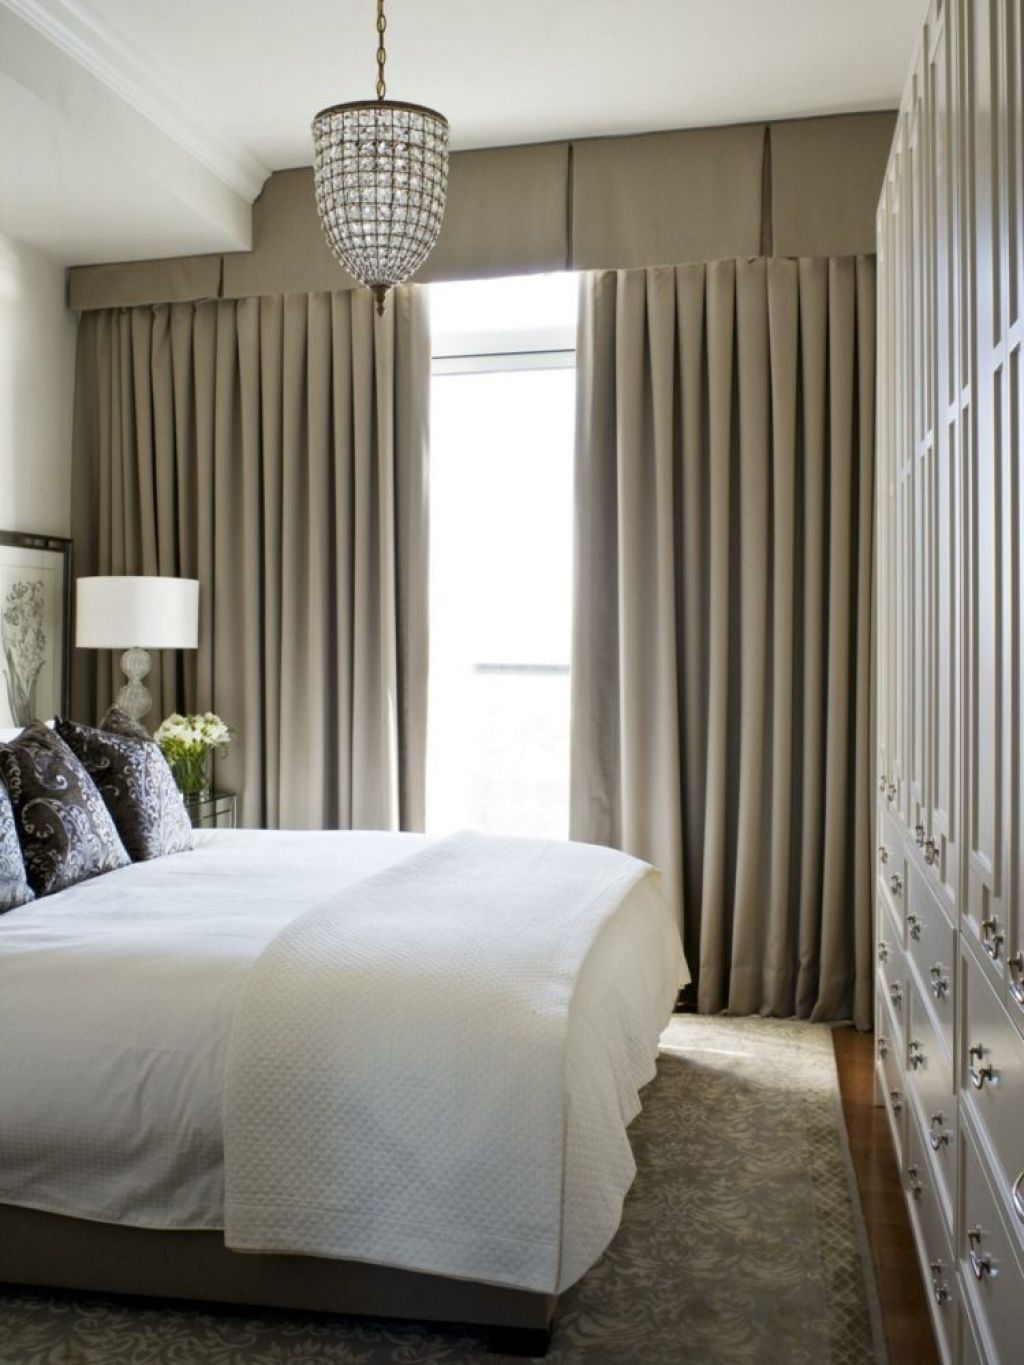 Small Bedroom With Long Curtains And Pleated Valances With Hanging Inside Long Bedroom Curtains (View 8 of 25)